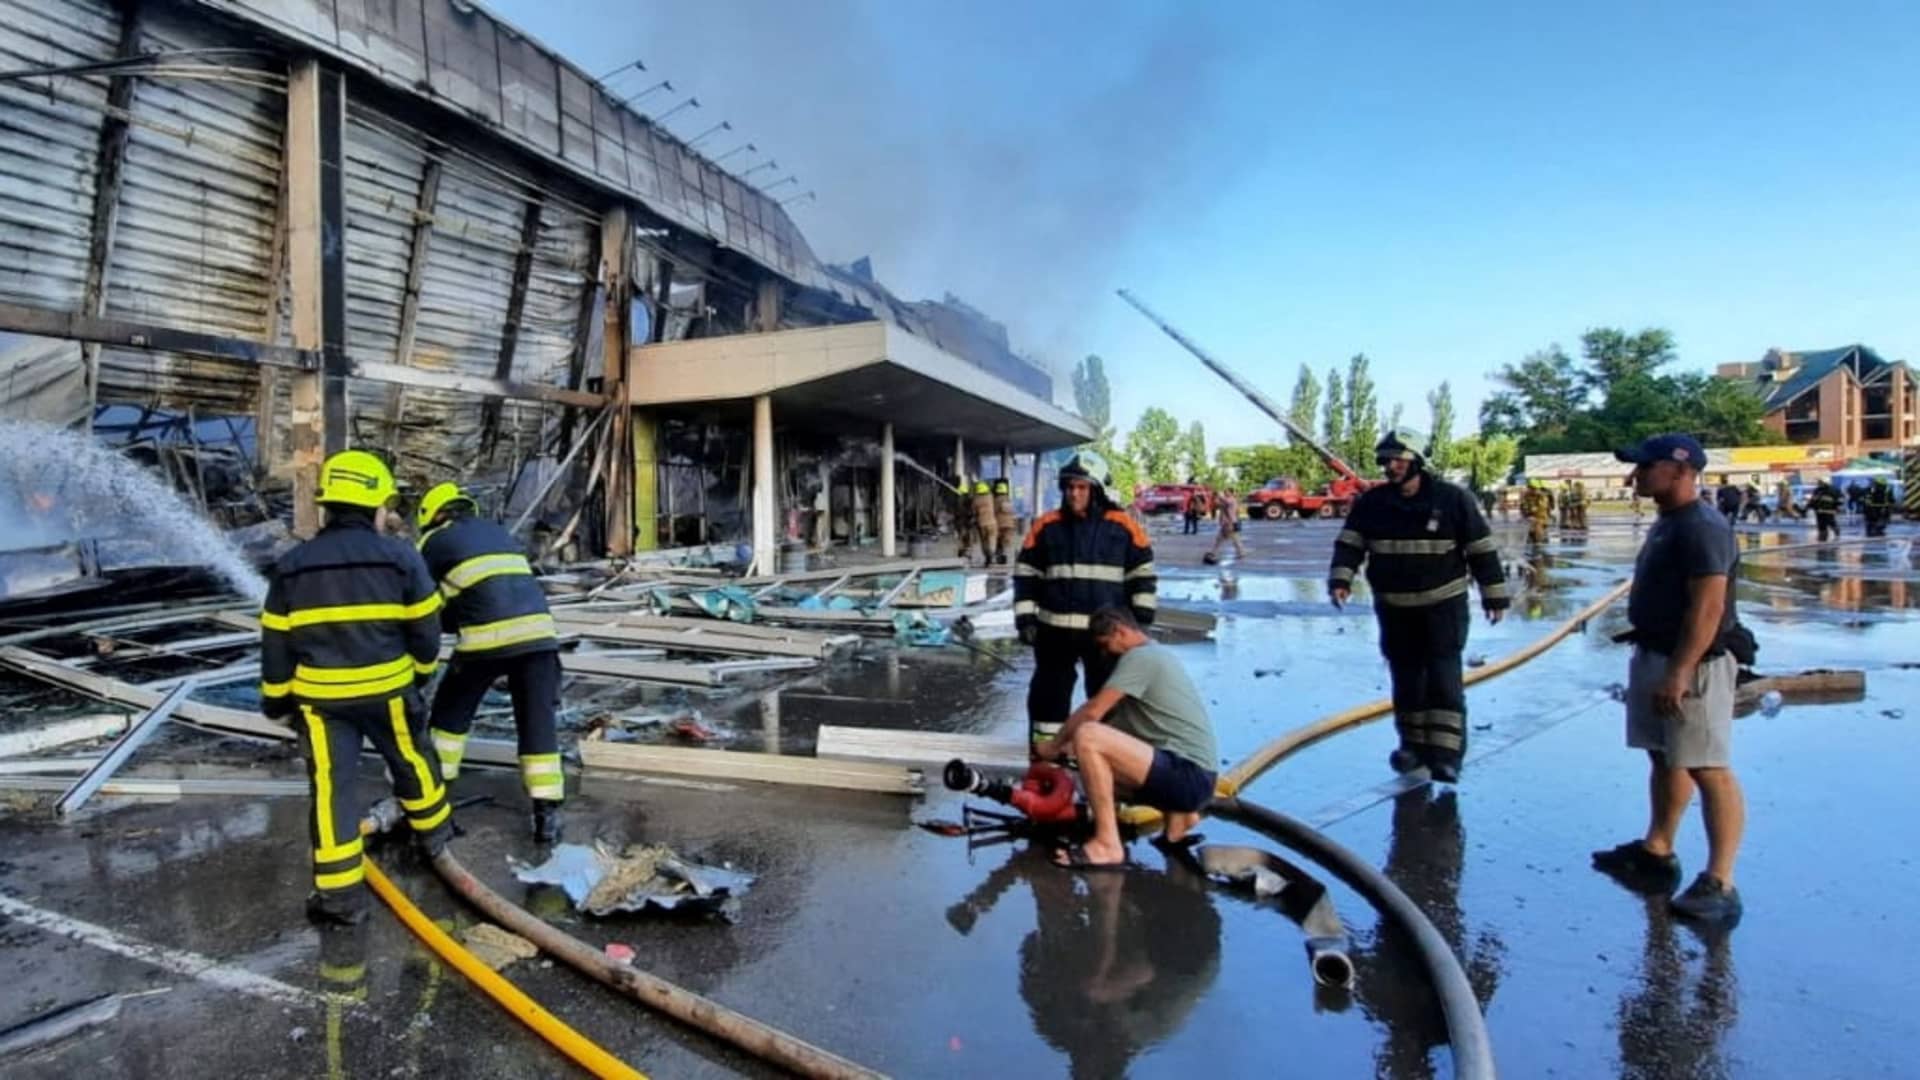 Rescue workers at the shopping mall hit by a Russian missile strike in Kremenchuk, Ukraine, on June 27, 2022. G-7 leaders denounced the strike as a war crime, while Russia has denied that it targeted a civilian building on purpose.